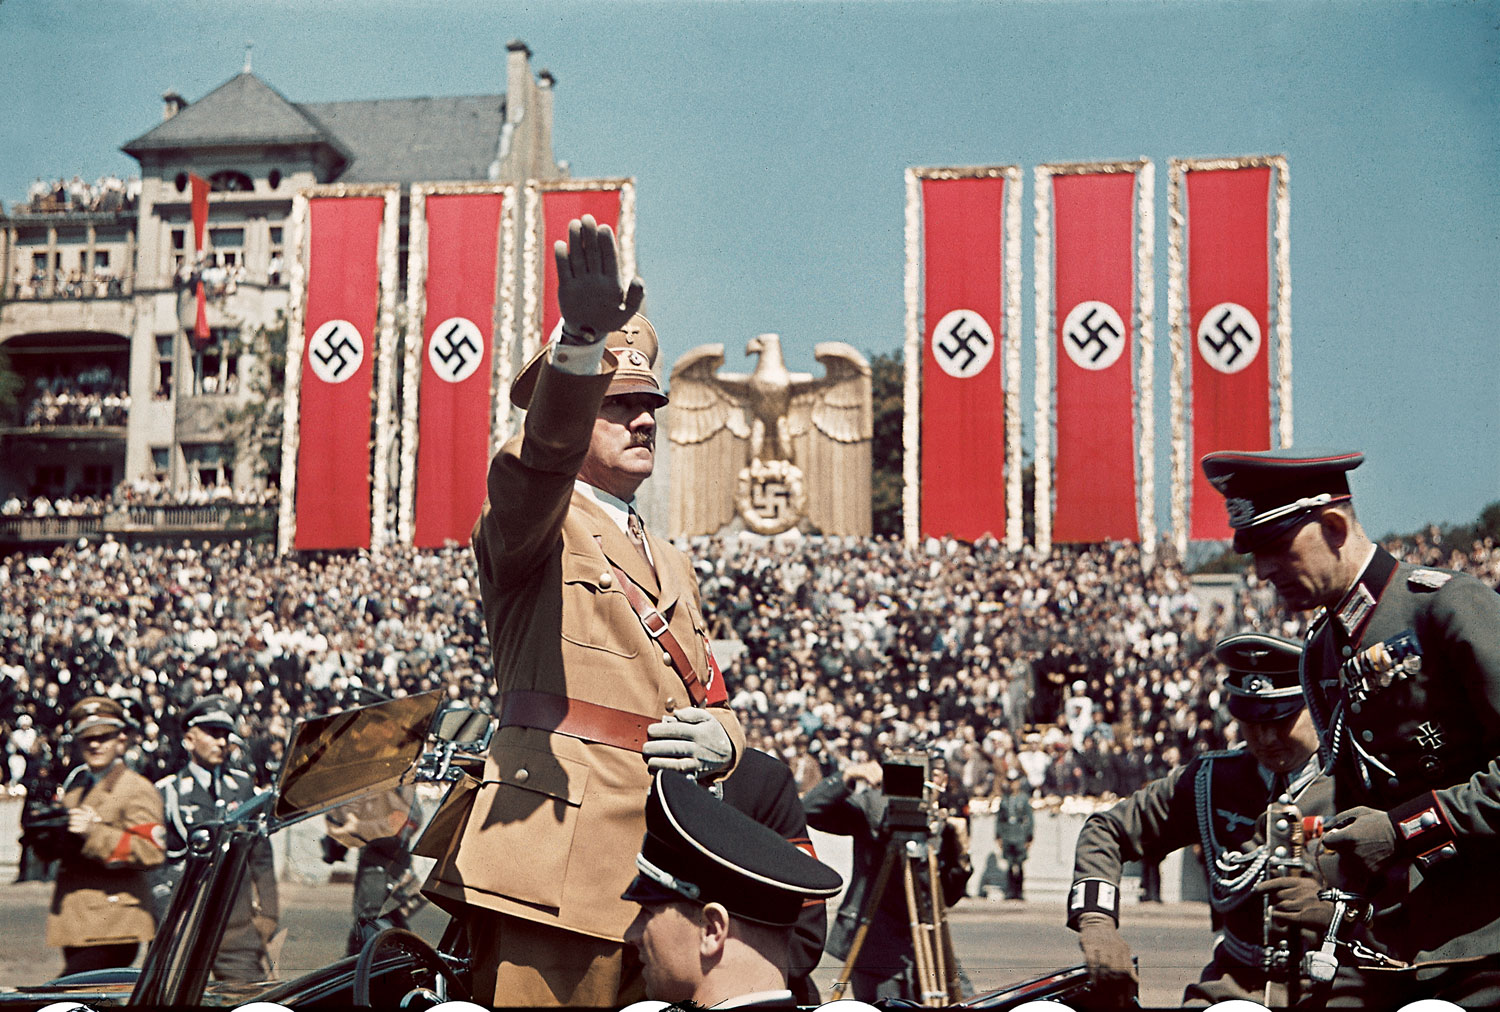 Adolf Hitler salutes troops of the Condor Legion who fought alongside Spanish Nationalists in the Spanish Civil War, during a rally upon their return to Germany, 1939.